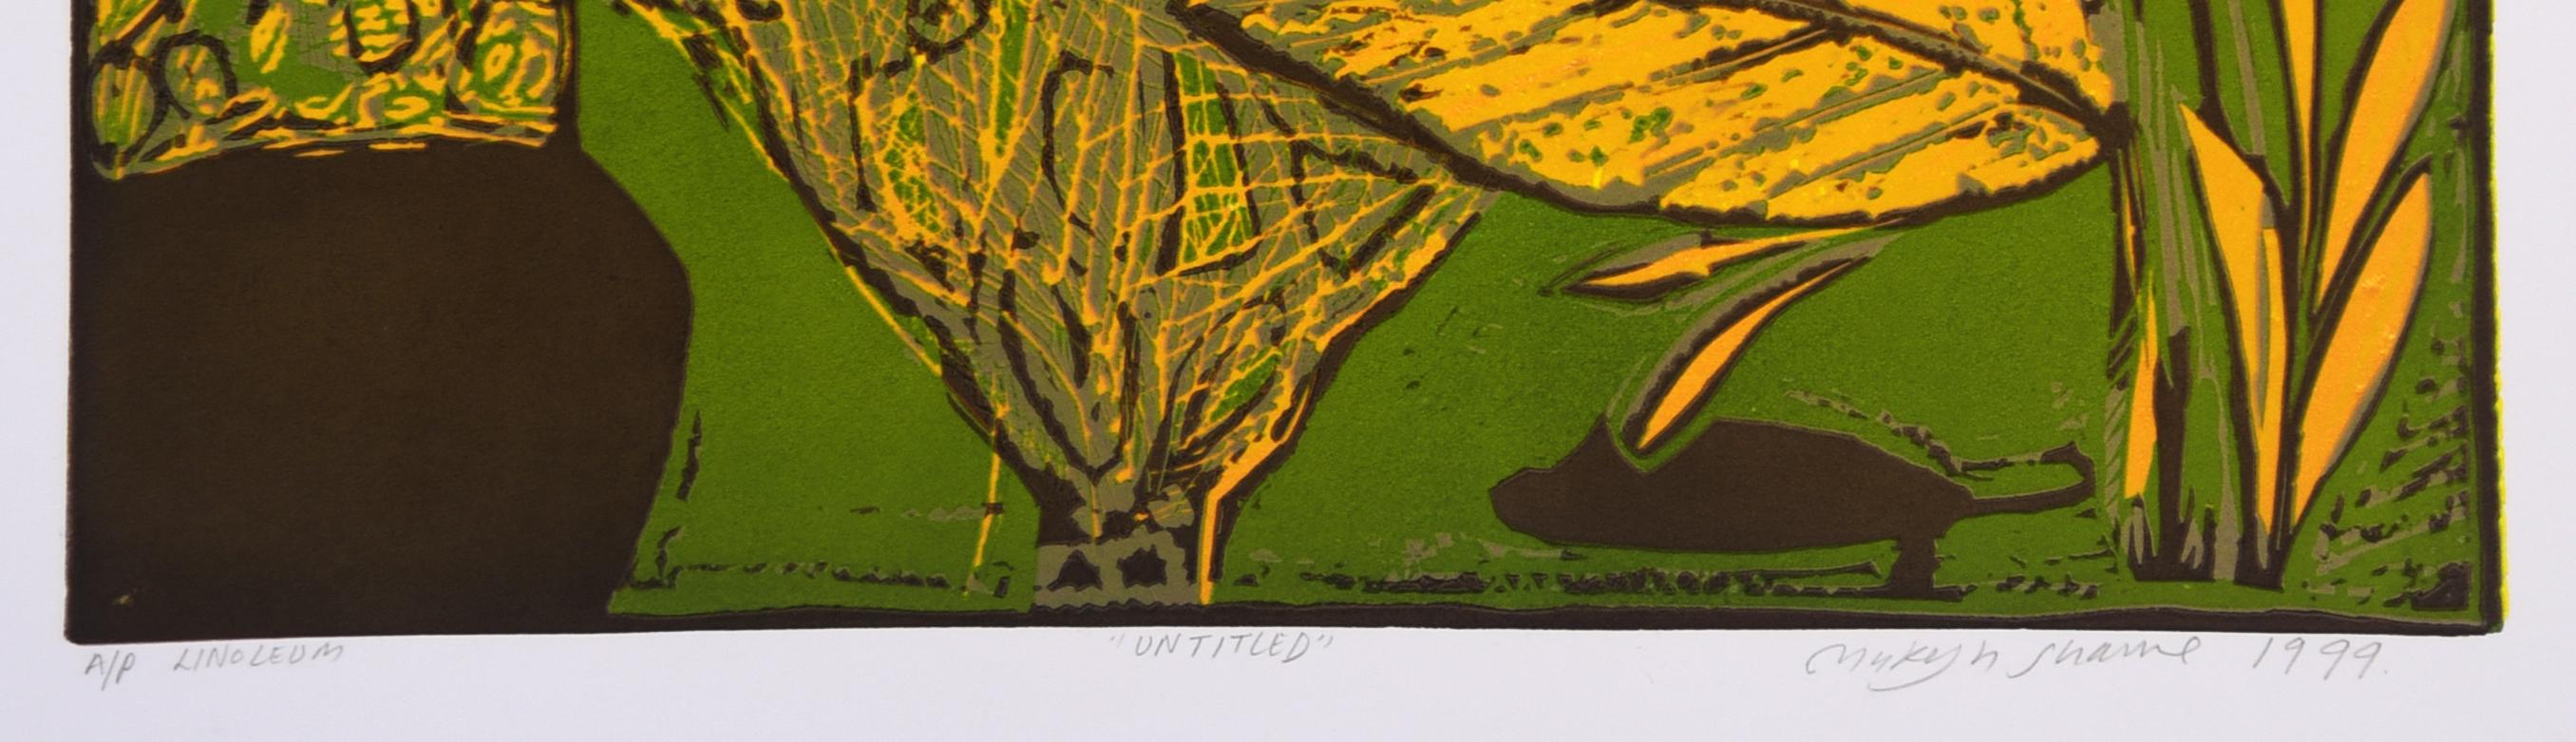 Abstract Landscape India Edition 3/5 Linocut Print Nature Green Yellow Leaves  For Sale 2